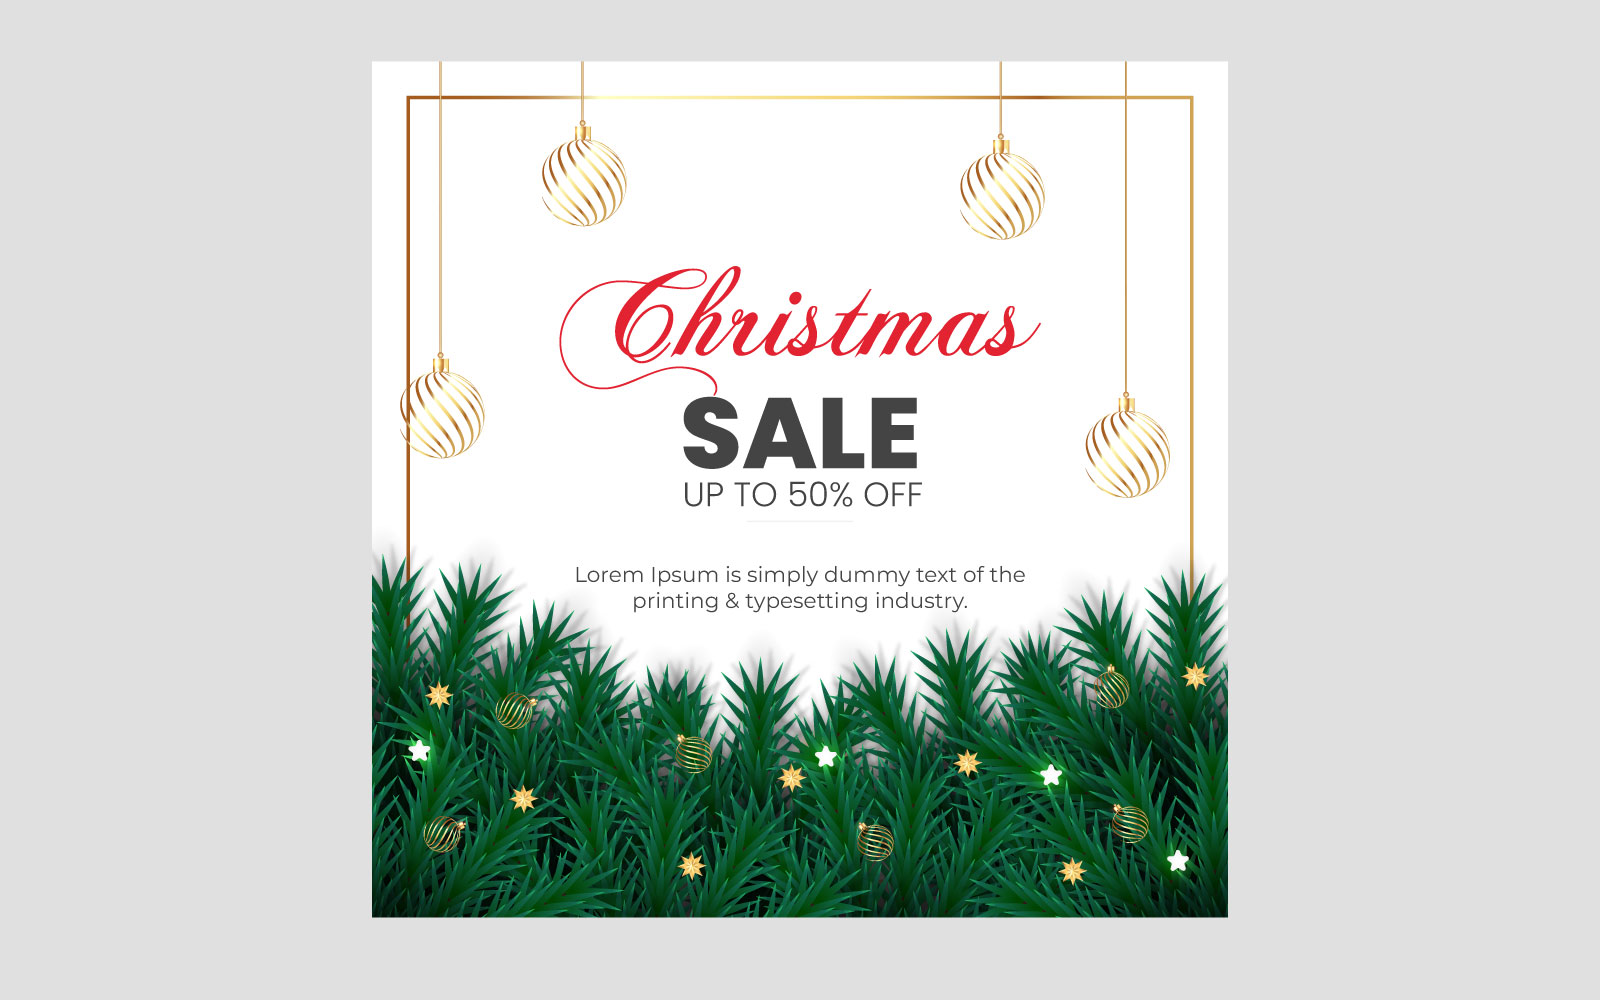 Christmas sale post decoration with christmas ball pine branches and star